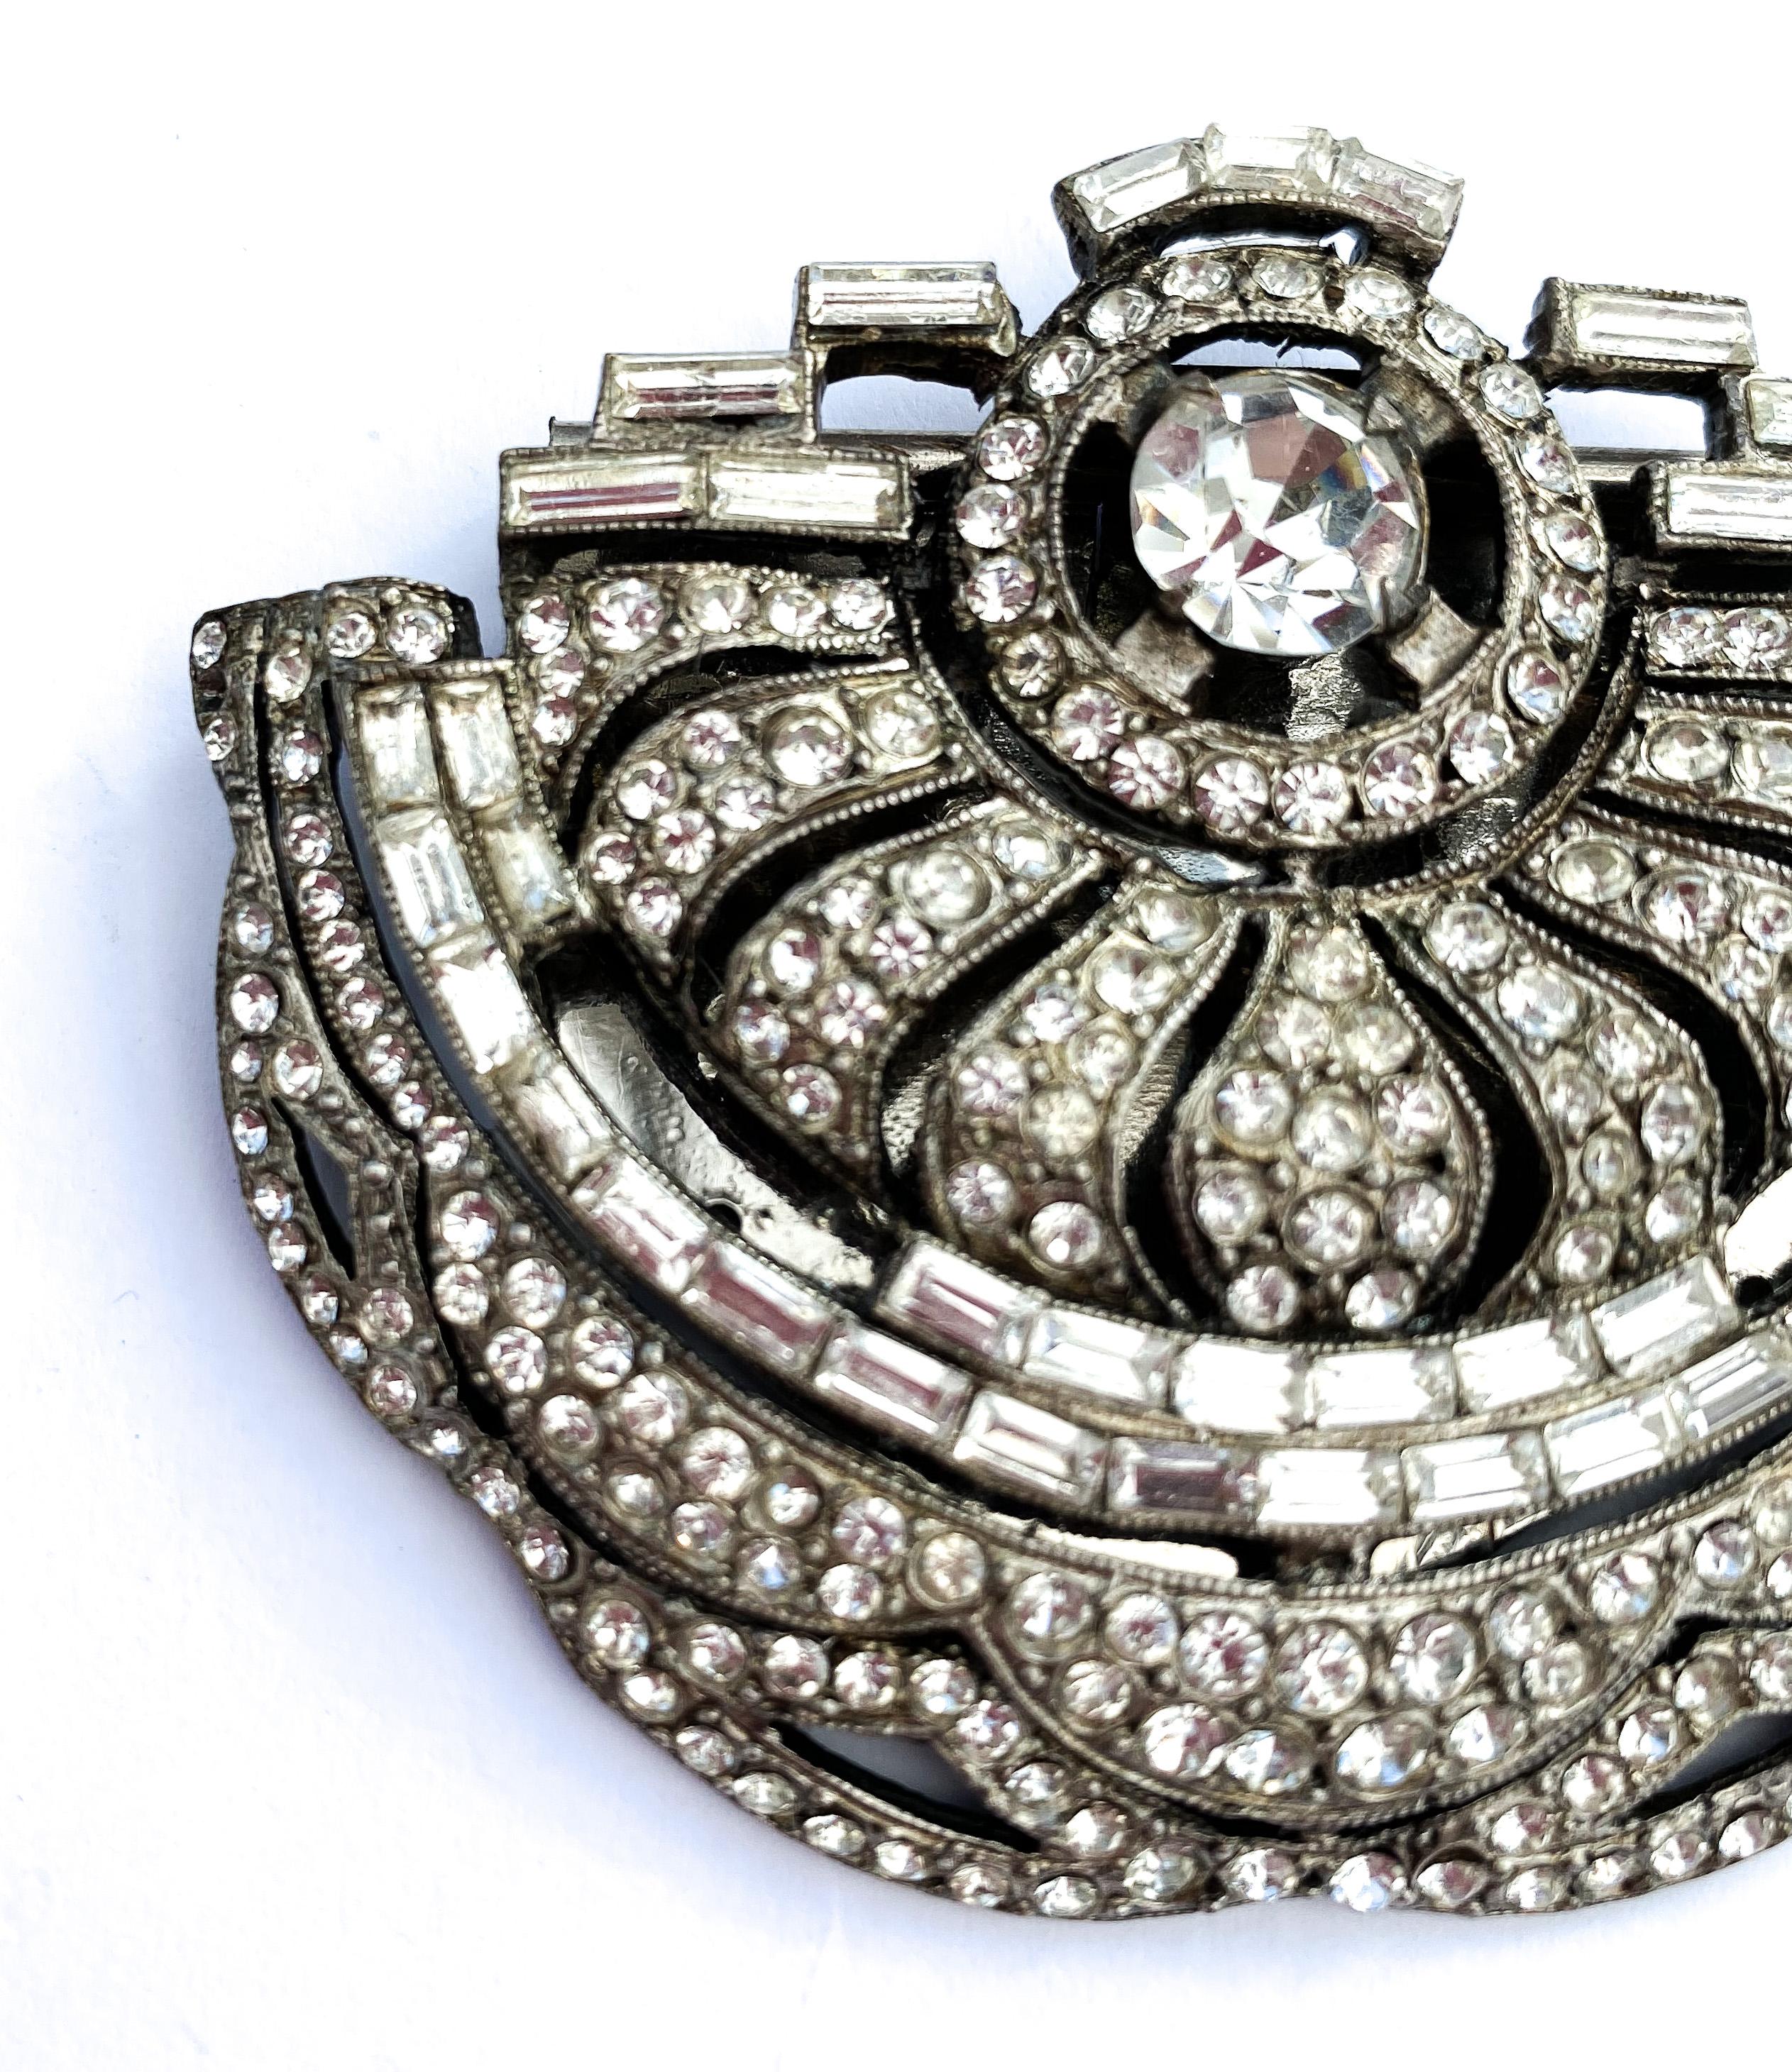 A very stylish jewel, high high Art Deco in the French floral style and manufacture.
This is a clip fitting, bold and strong, that would clip onto a clutch bag, a lapel, or on the edging of a low cut dress, front or back, a jewel of many and diverse